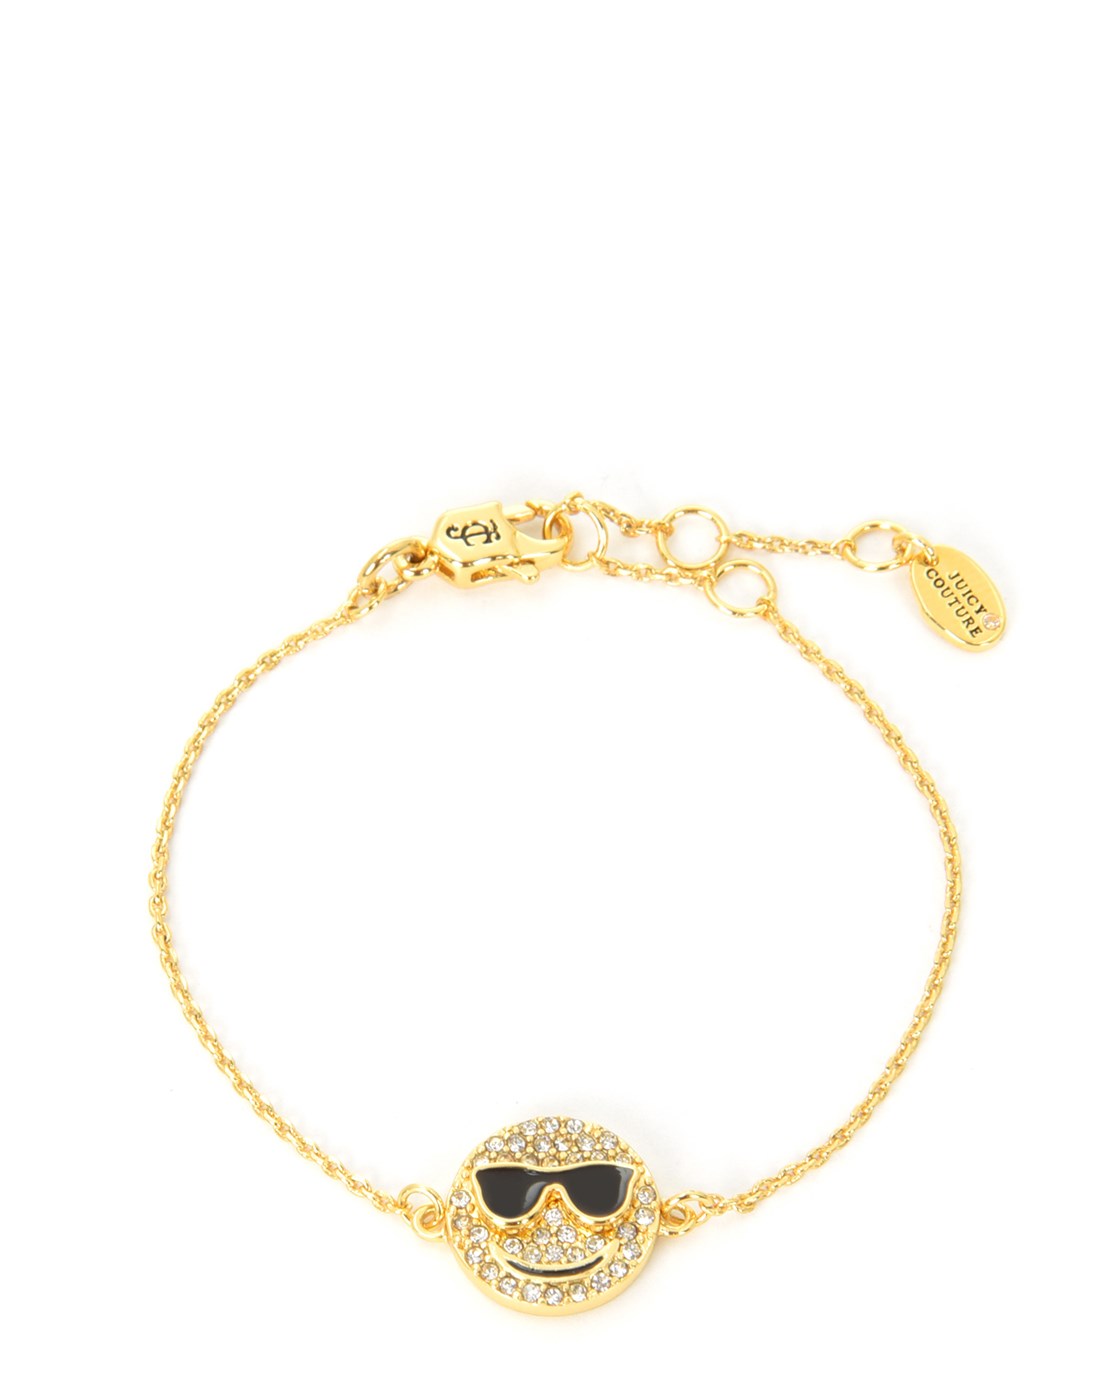 Juicy Couture PAVE SMILEY FACE WISHES BRACELET